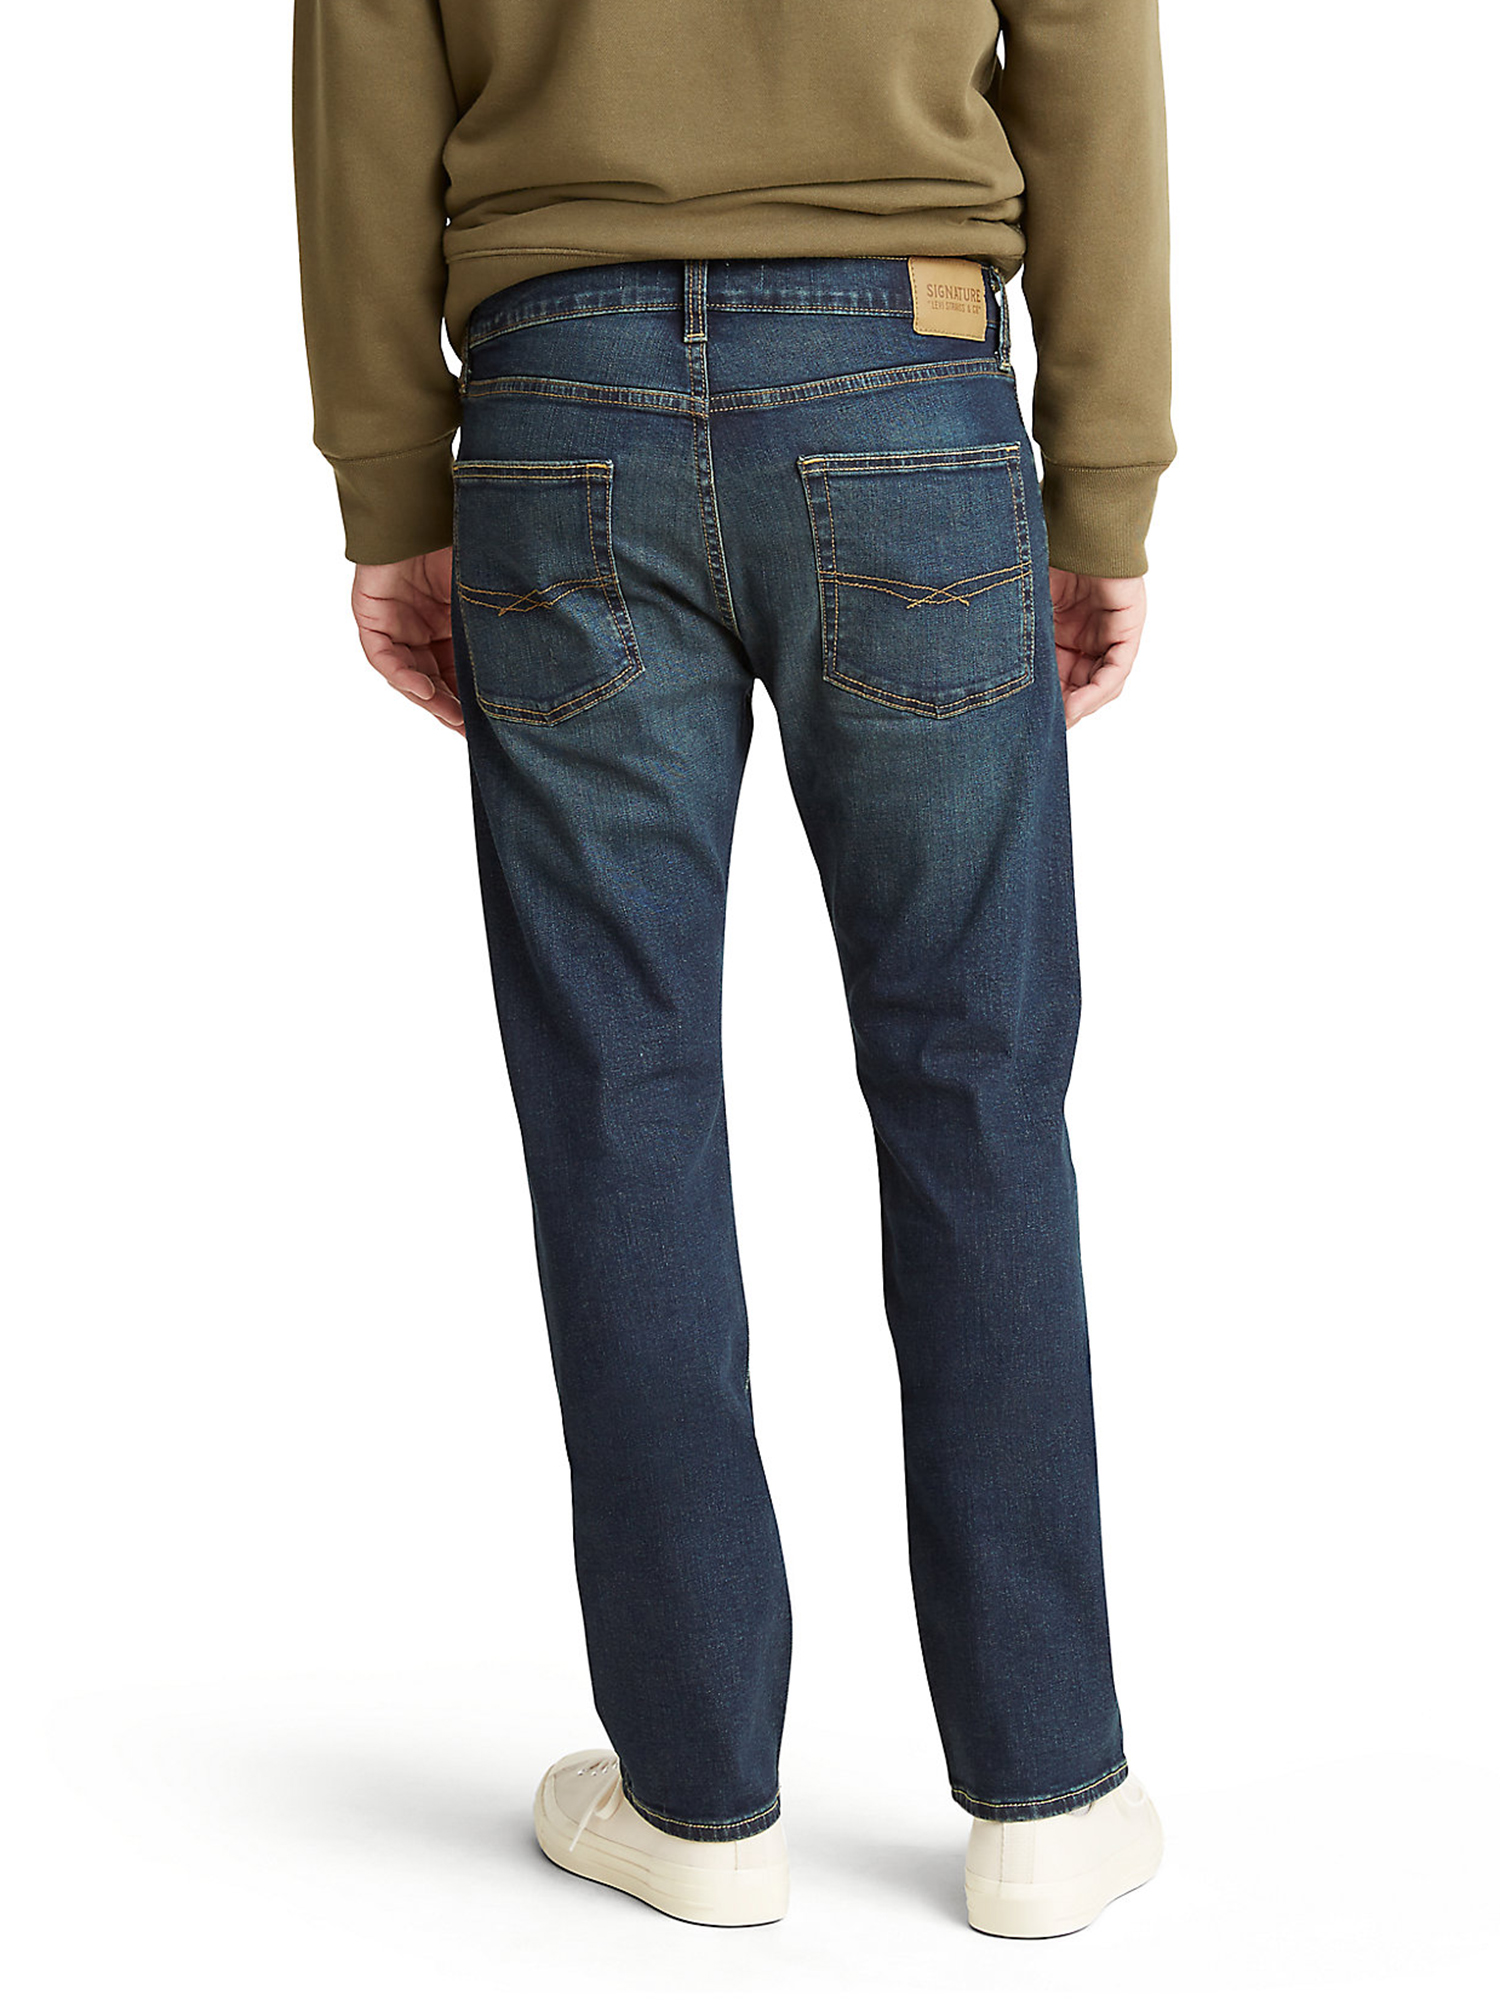 Signature by Levi Strauss & Co. Men's and Big and Tall Straight Fit Jeans - image 4 of 7